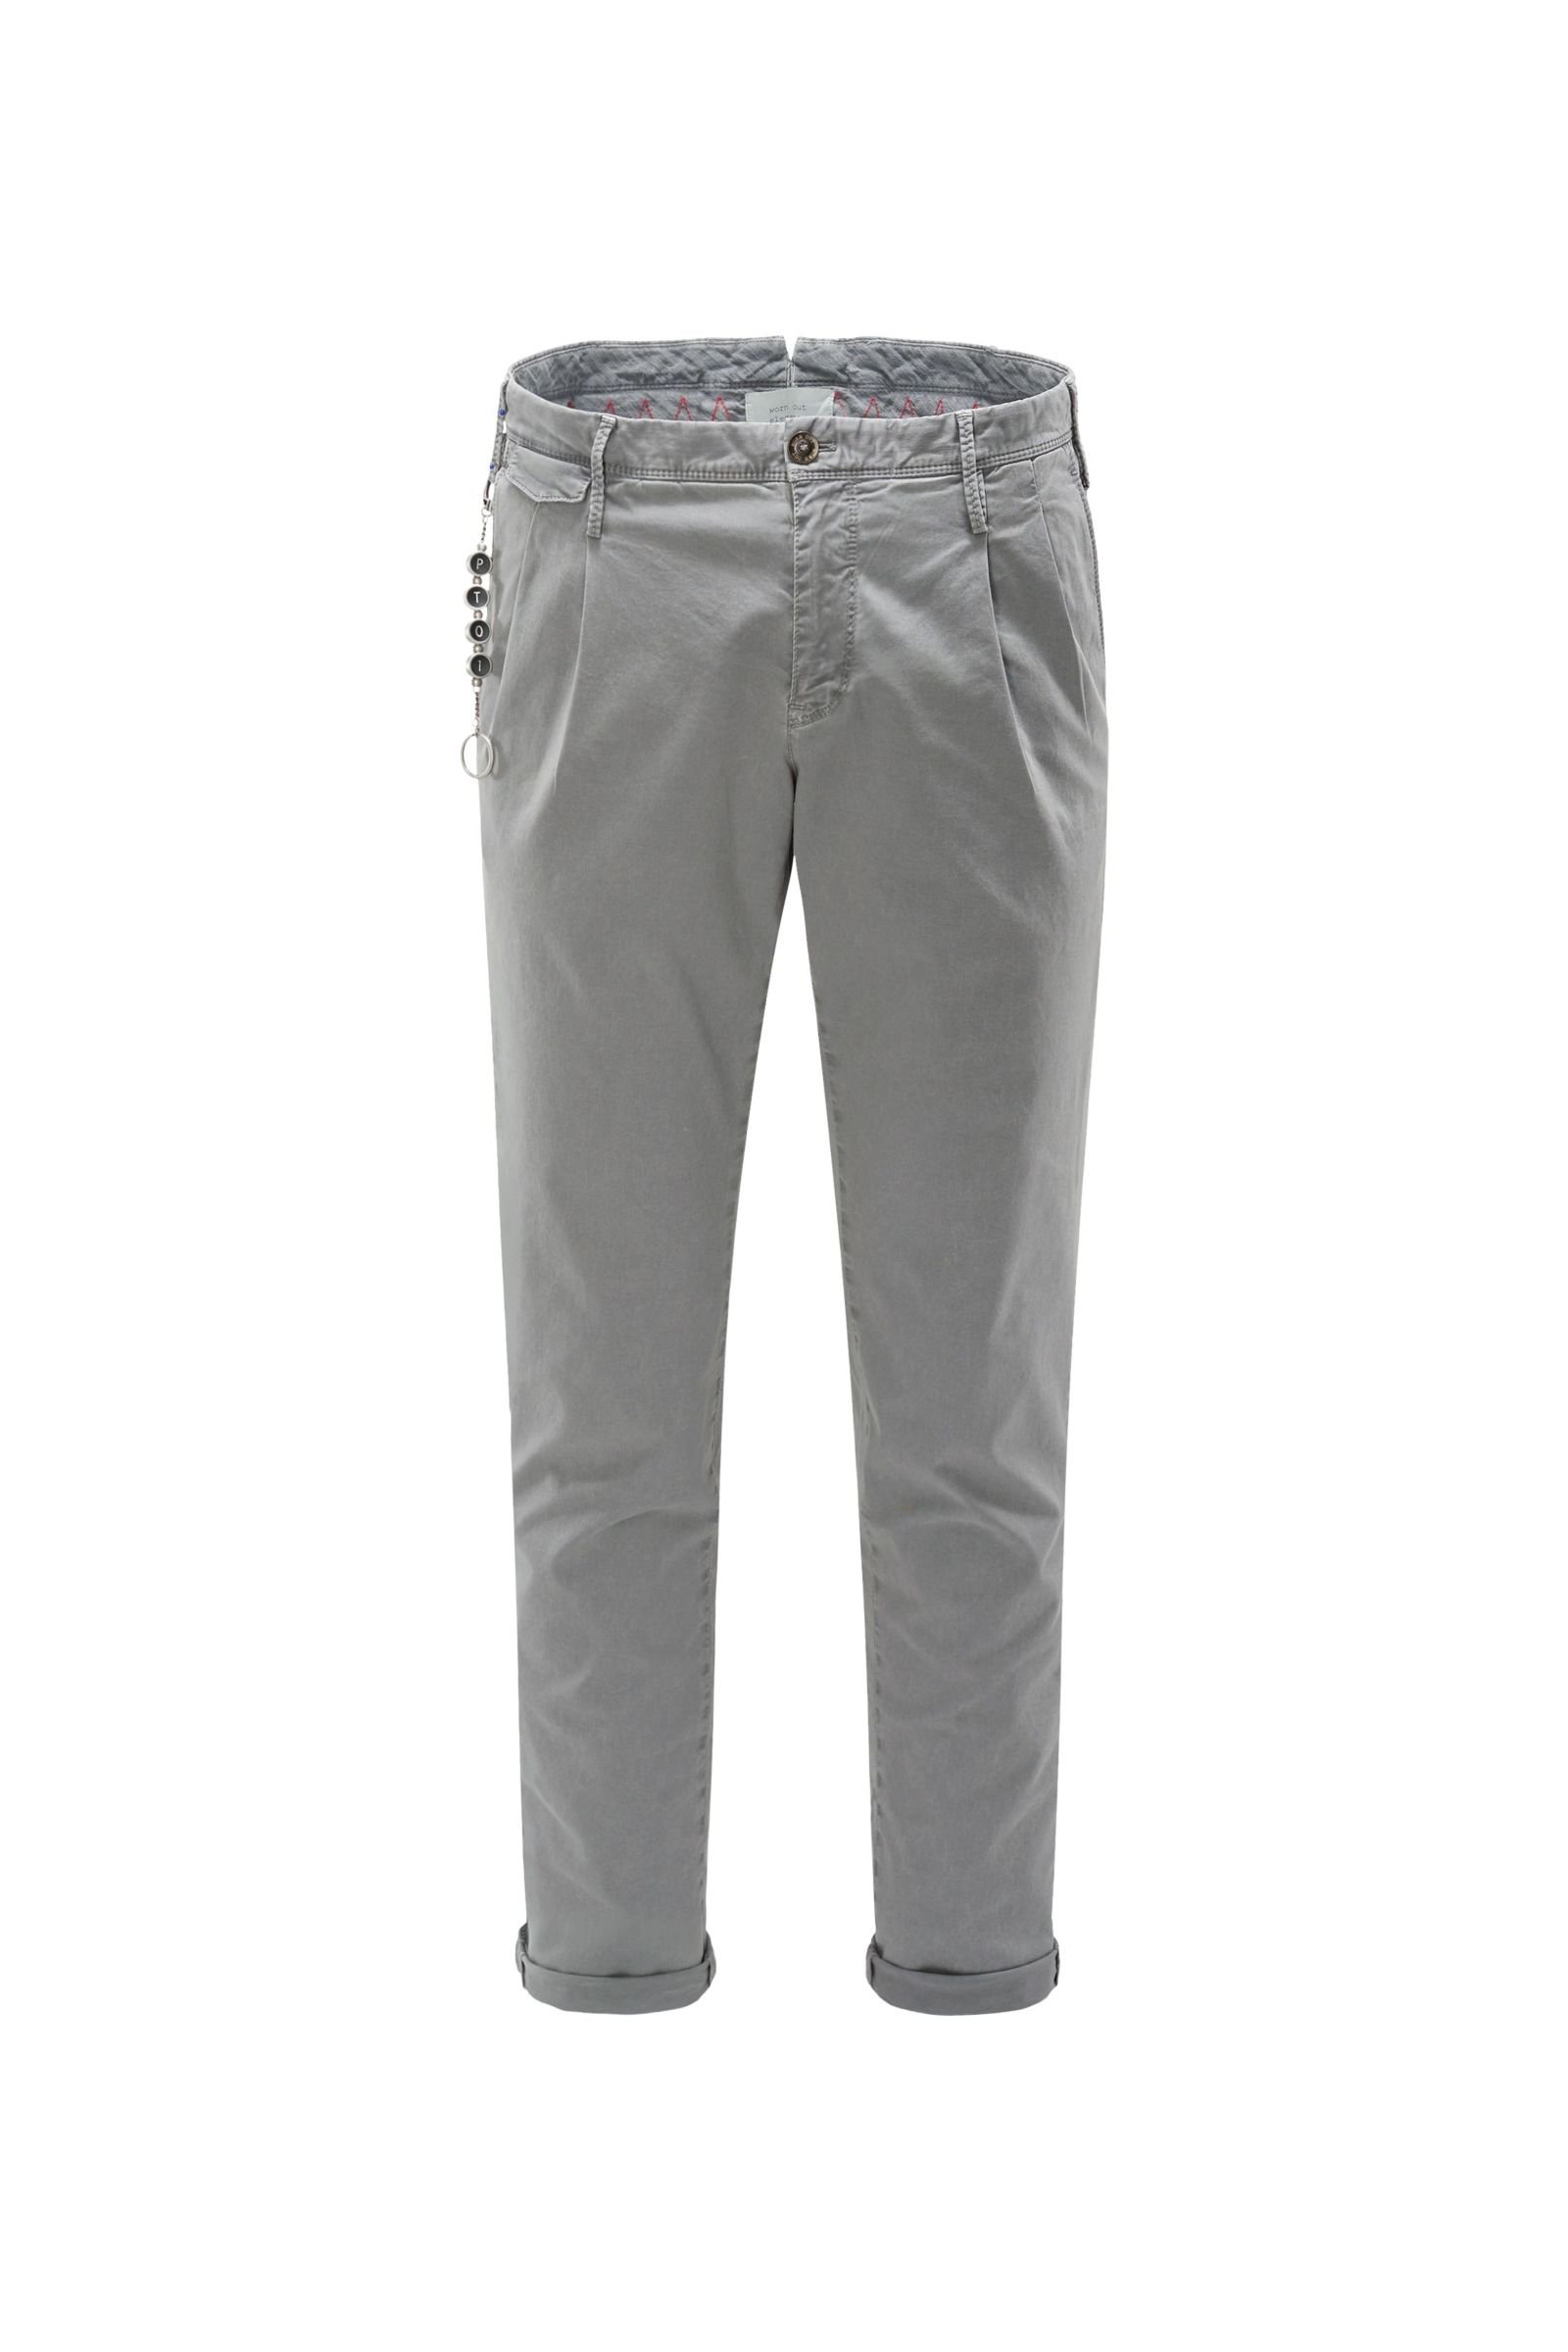 Cotton trousers 'Arial Worn out Elegance' grey